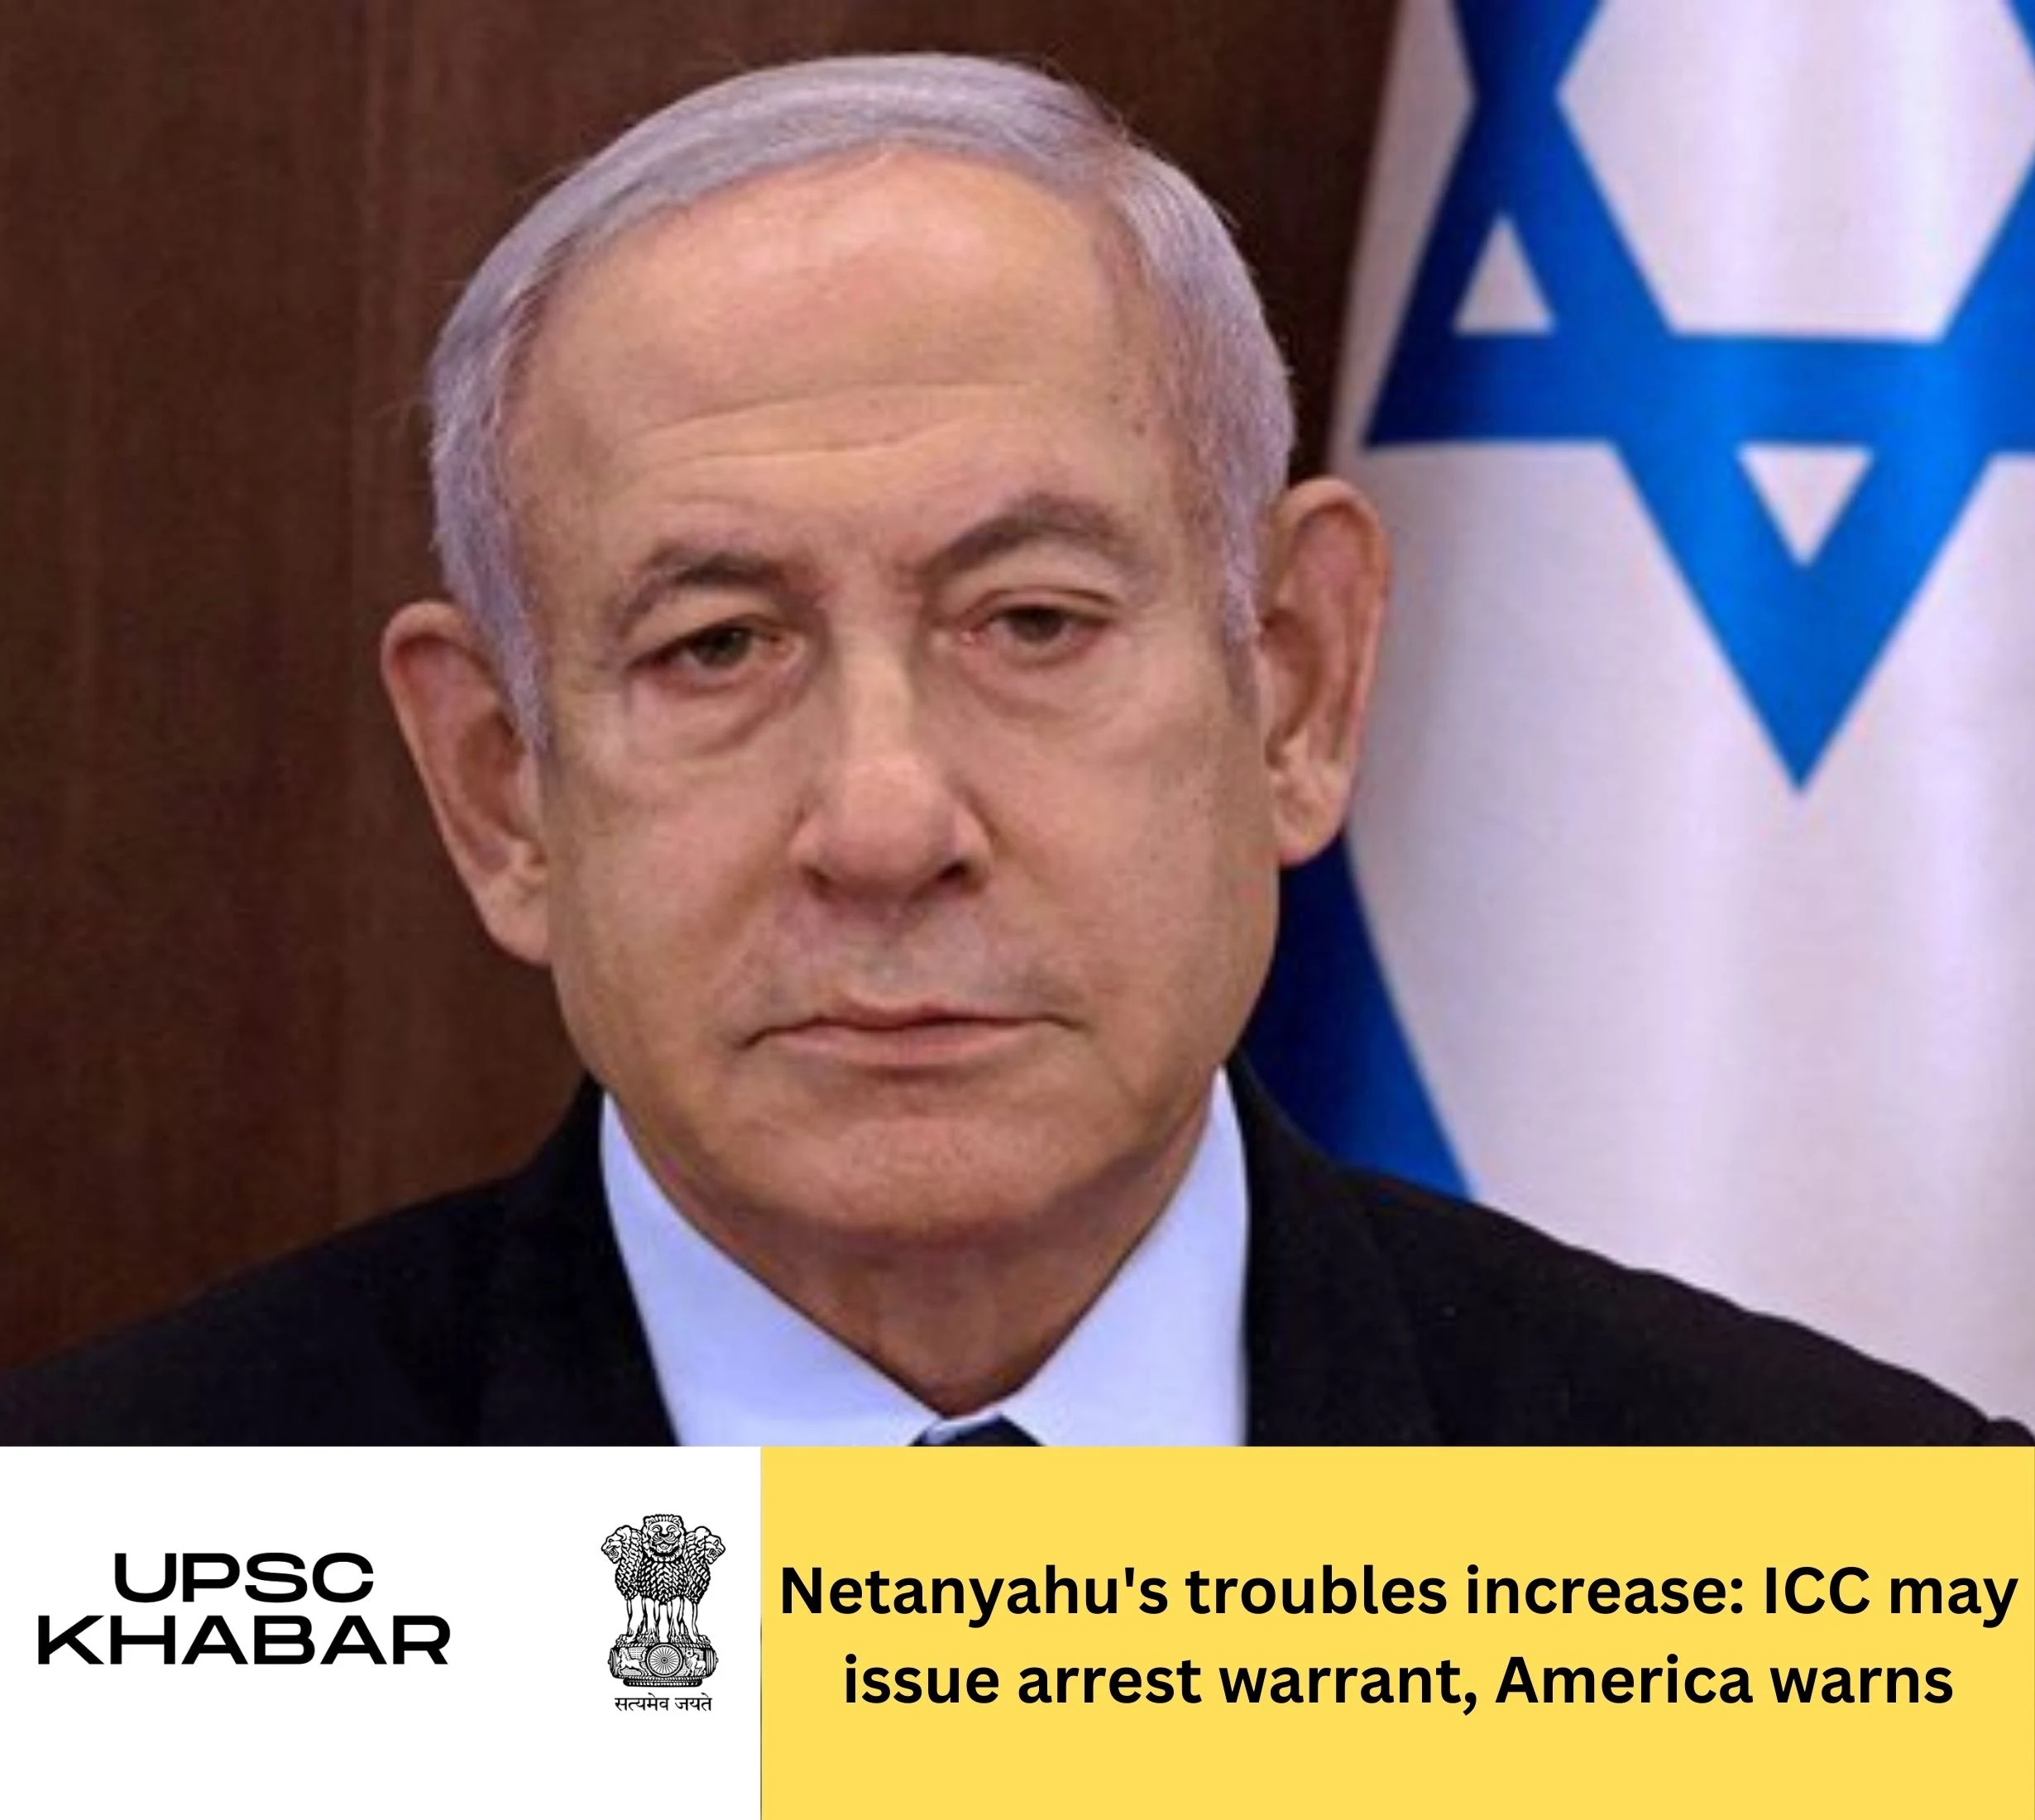 Netanyahu's troubles increase: ICC may issue arrest warrant, America warns